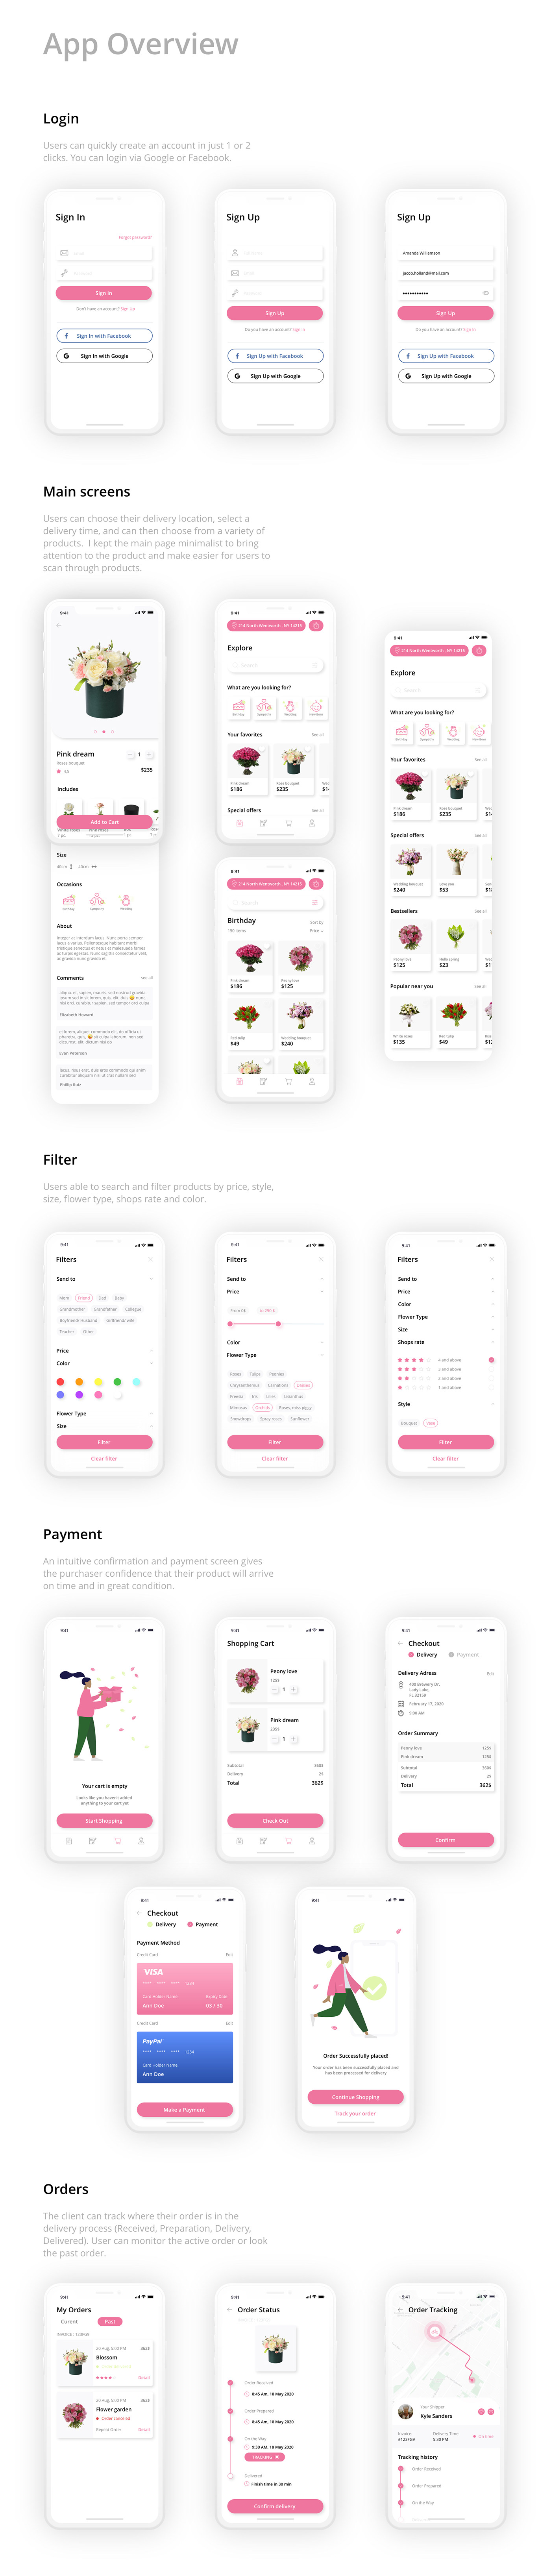 delivery flower delivery app UI ux minimalist pink green mobile app